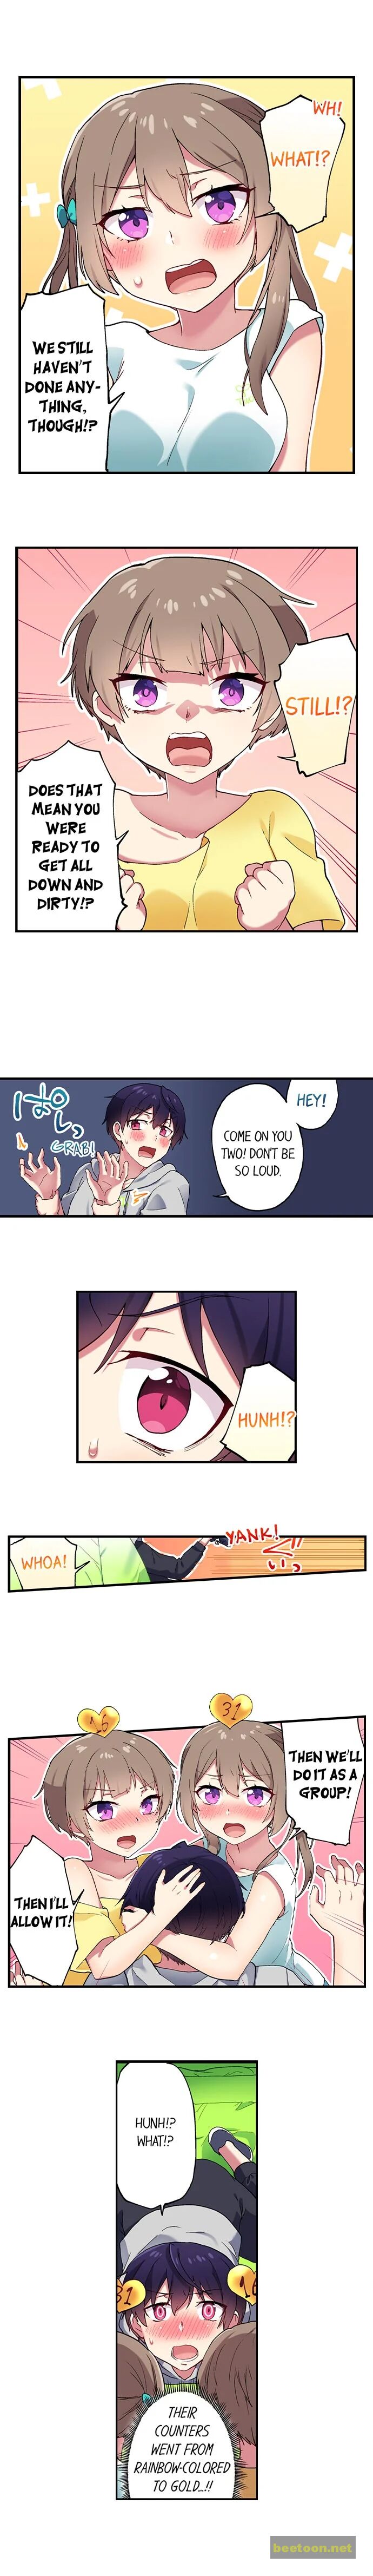 I Can See The Number Of Times People Orgasm Chapter 98 - MyToon.net